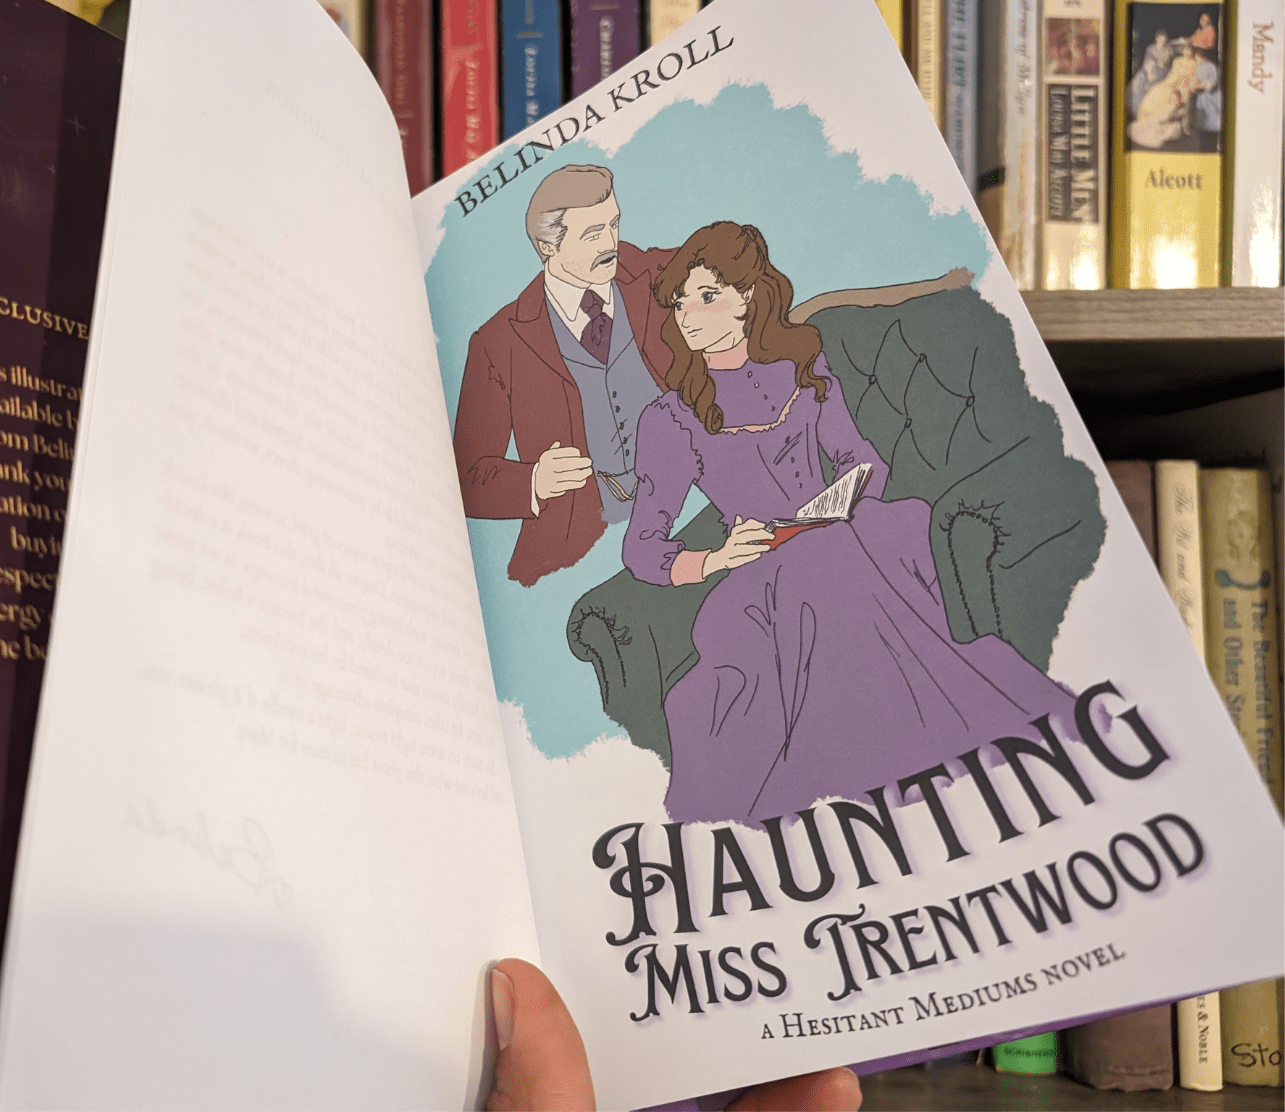 Haunting Miss Trentwood - signed illustrated editions - Belinda Kroll